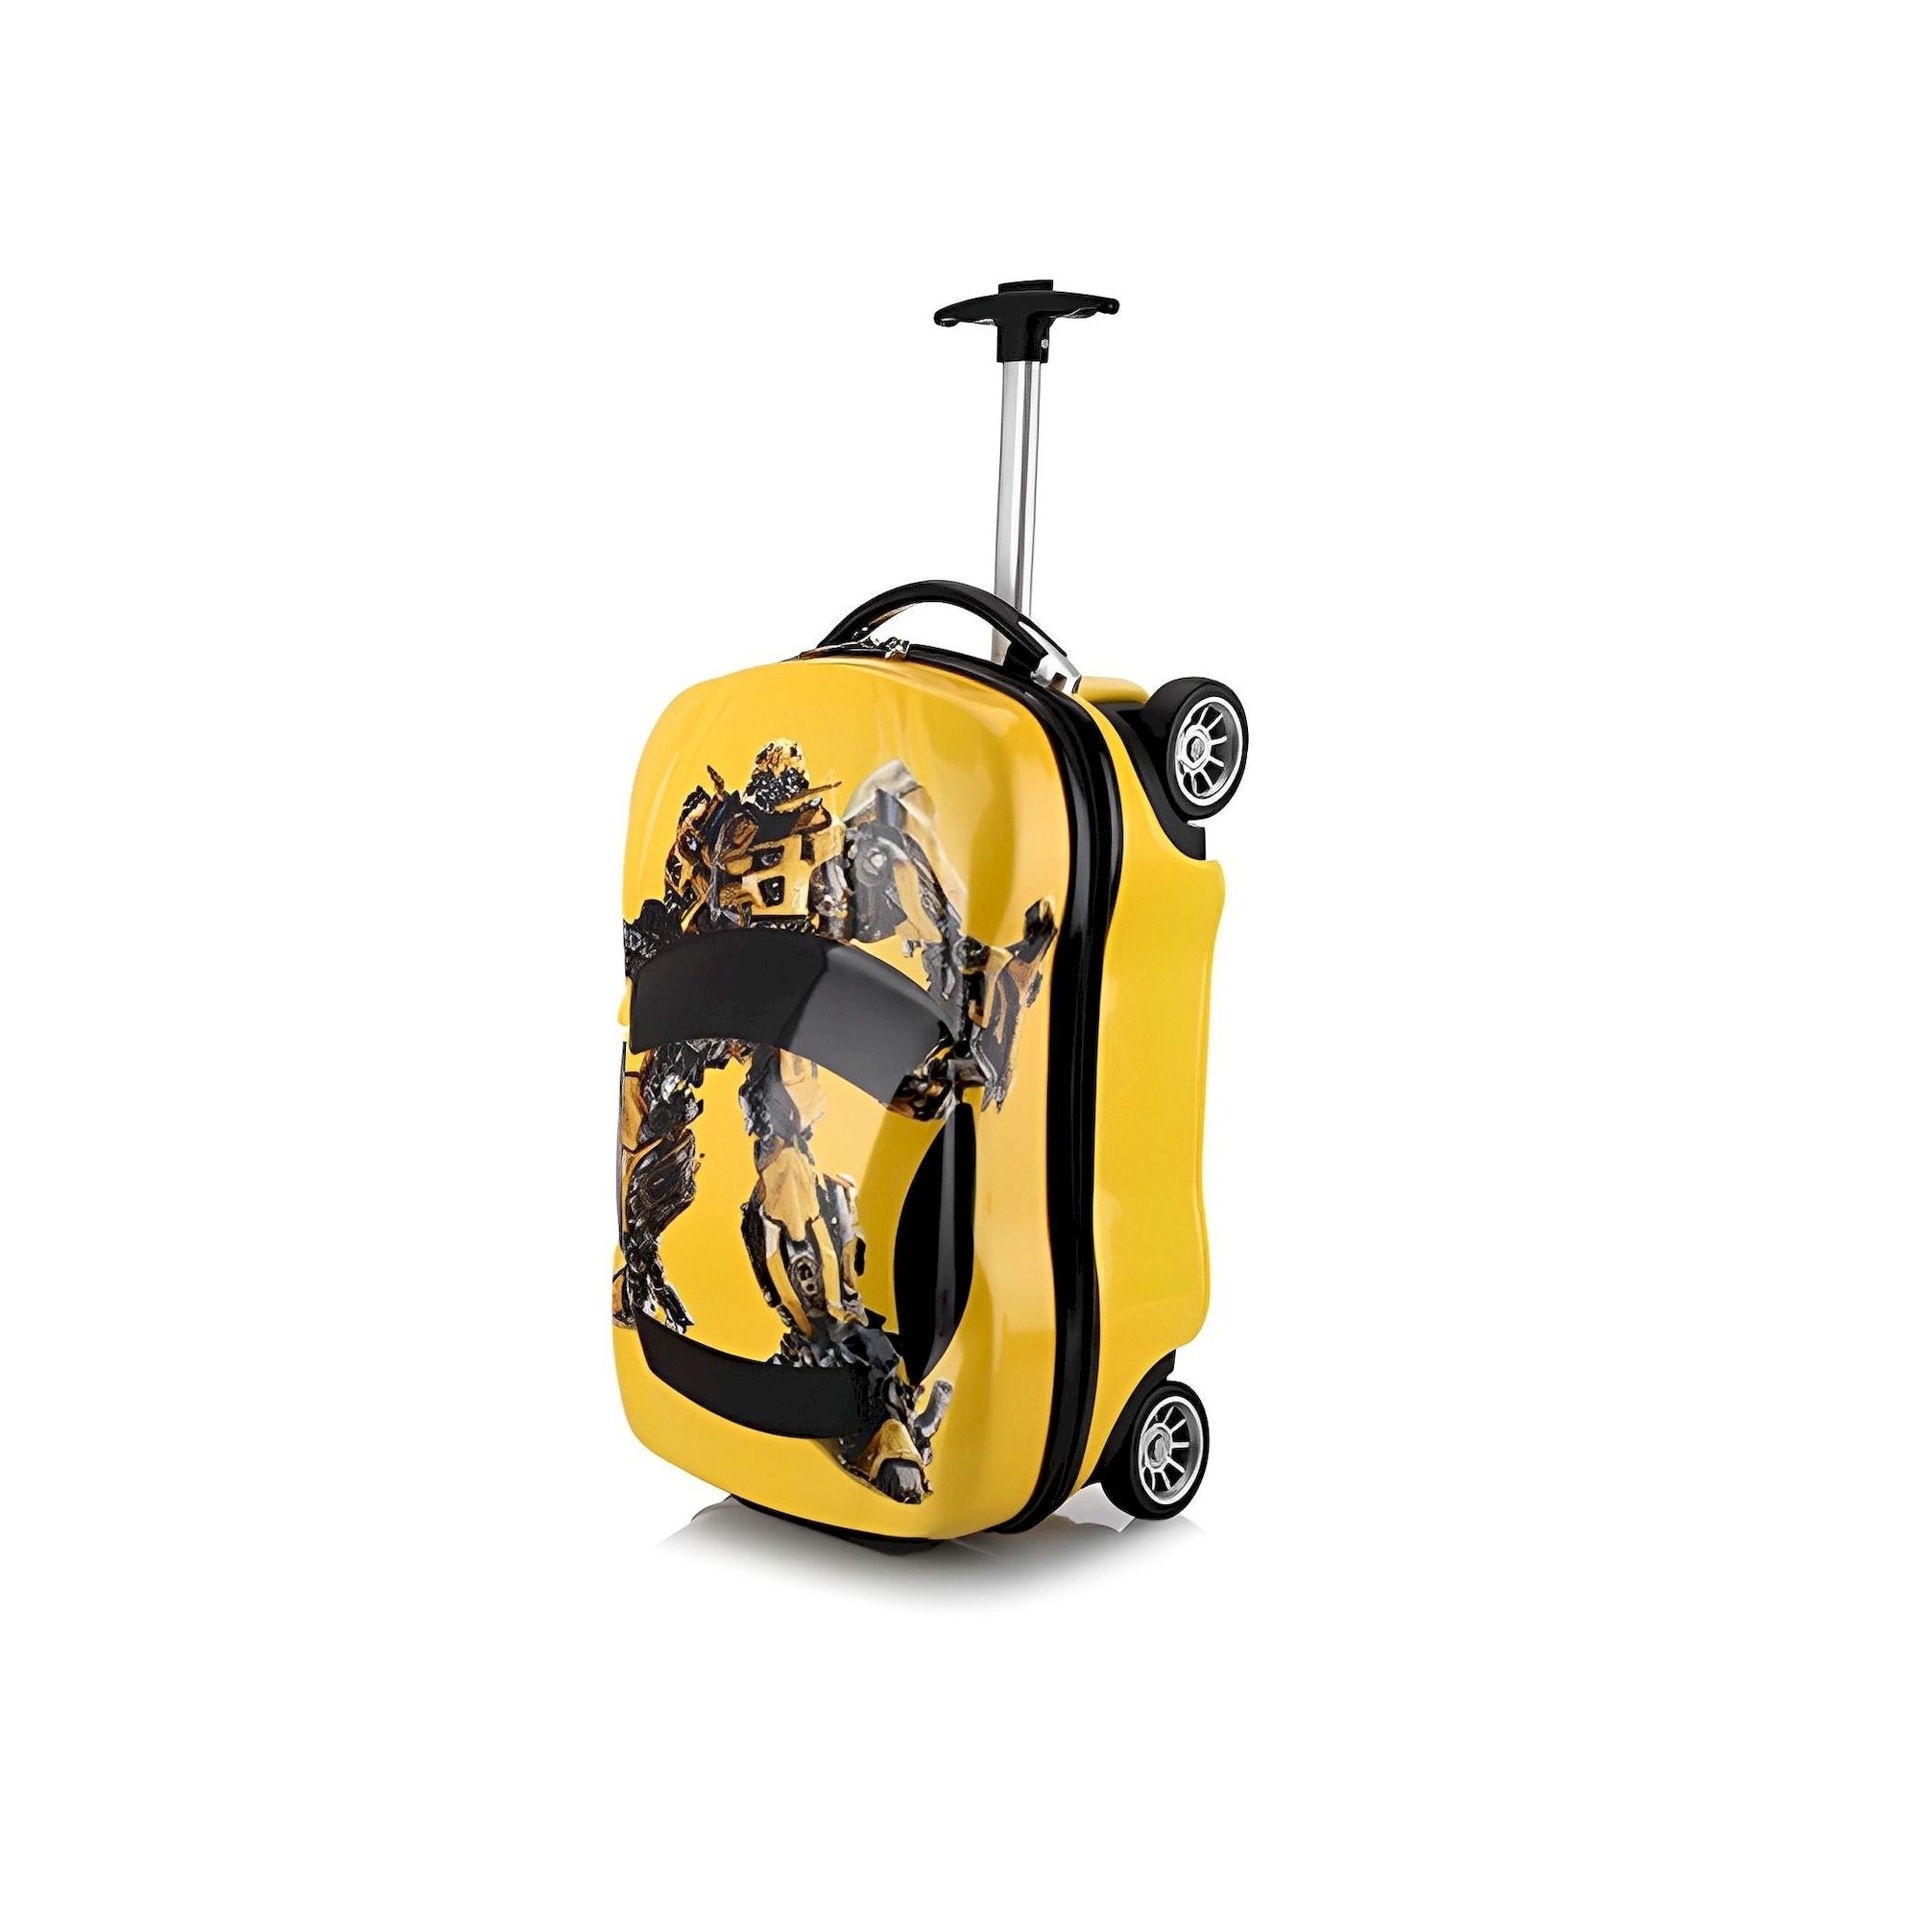 Pine Kids Trolley Luggage Bags Black 22 inch Online in India, Buy at Best  Price from Firstcry.com - 11181966